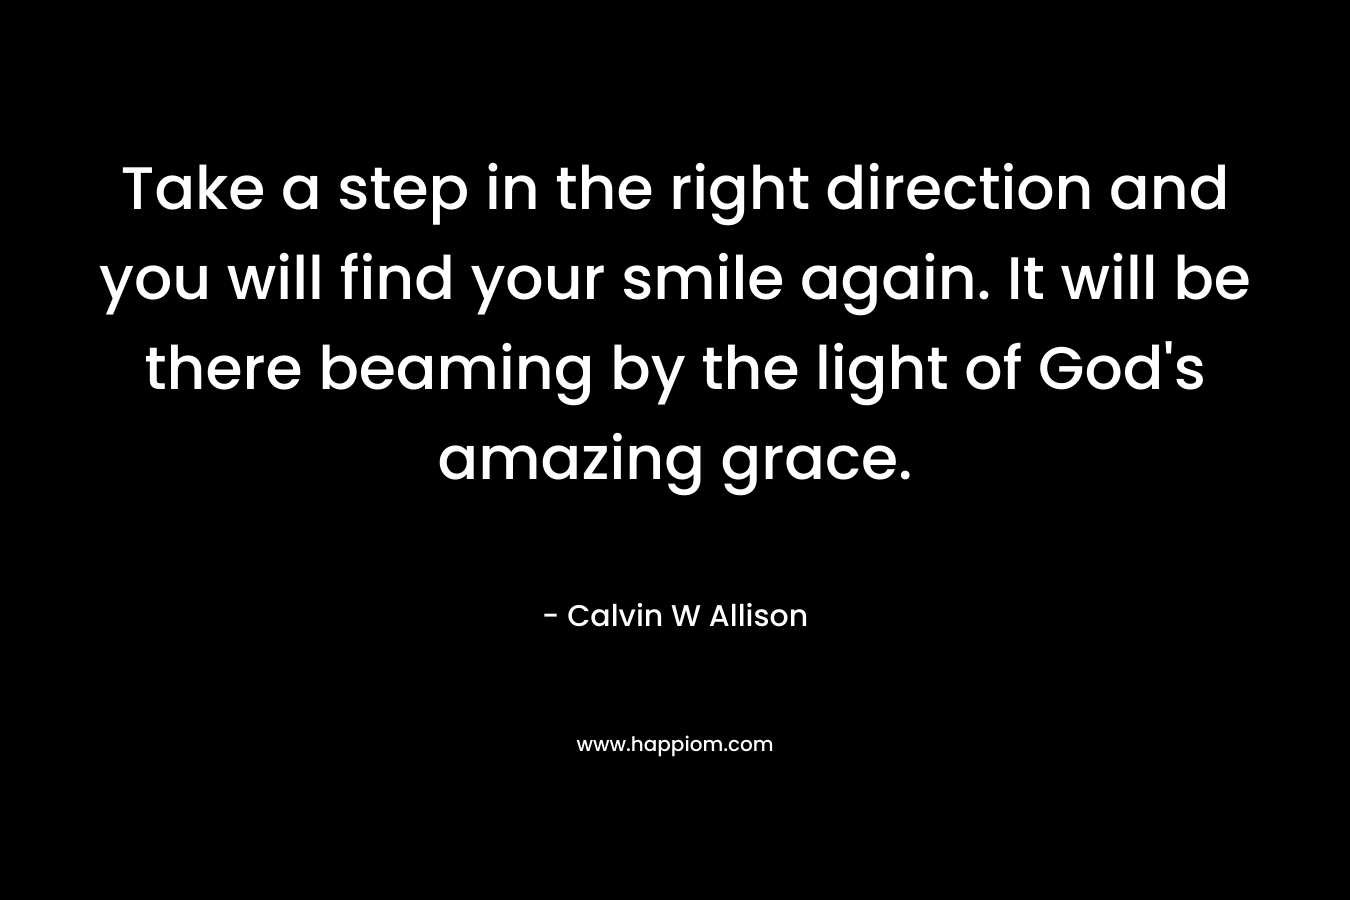 Take a step in the right direction and you will find your smile again. It will be there beaming by the light of God's amazing grace.